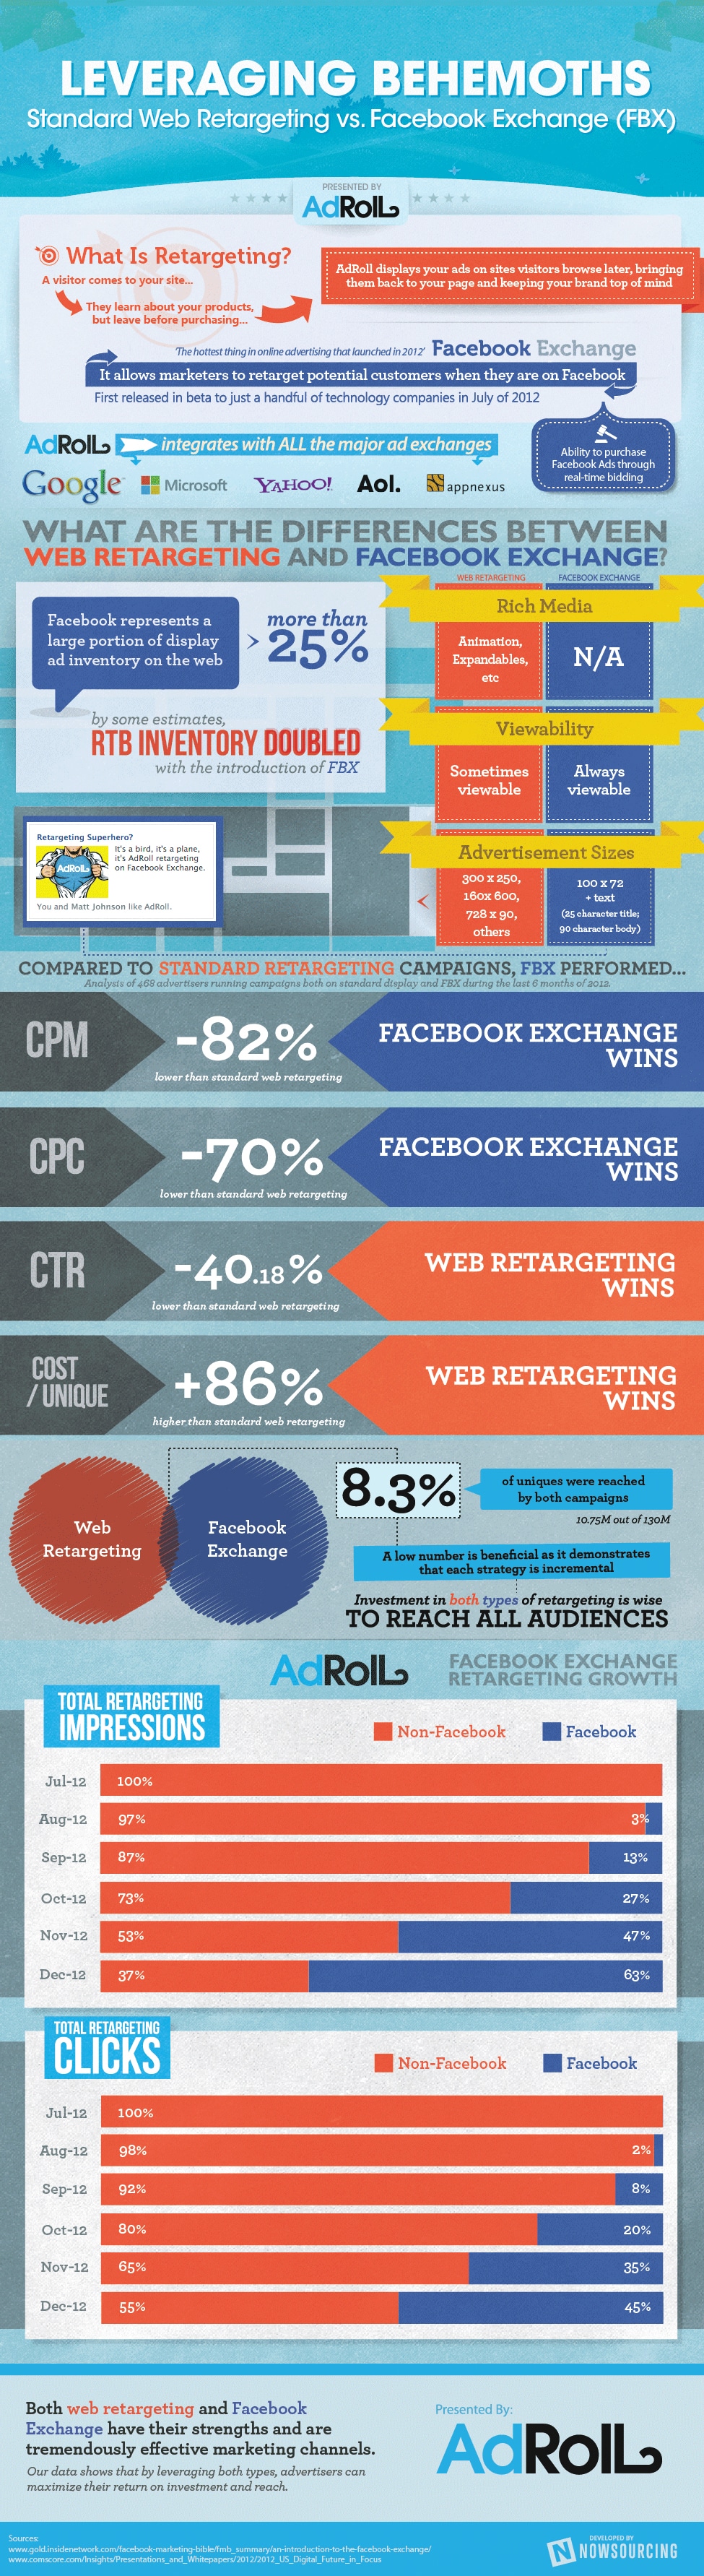 Facebook Exchange vs. Web Retargeted Ads: Pros & Cons [Infographic]